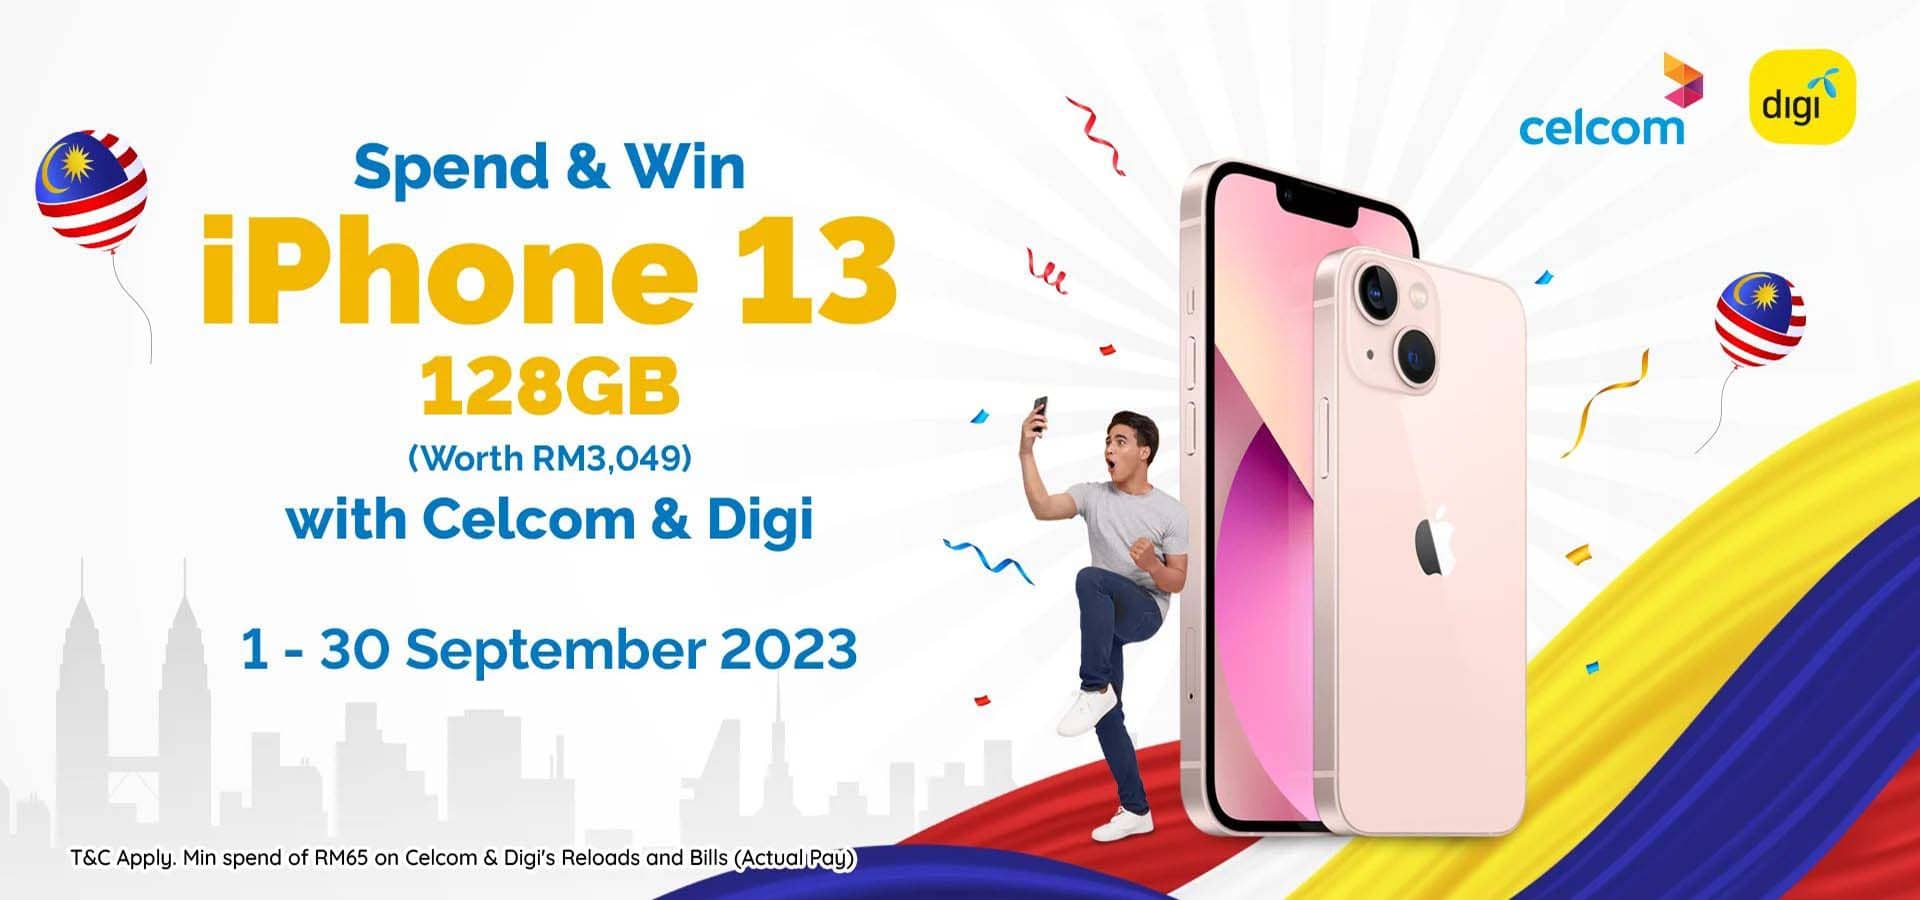 Win iPhone 13 128GB with Celcom and Digi!